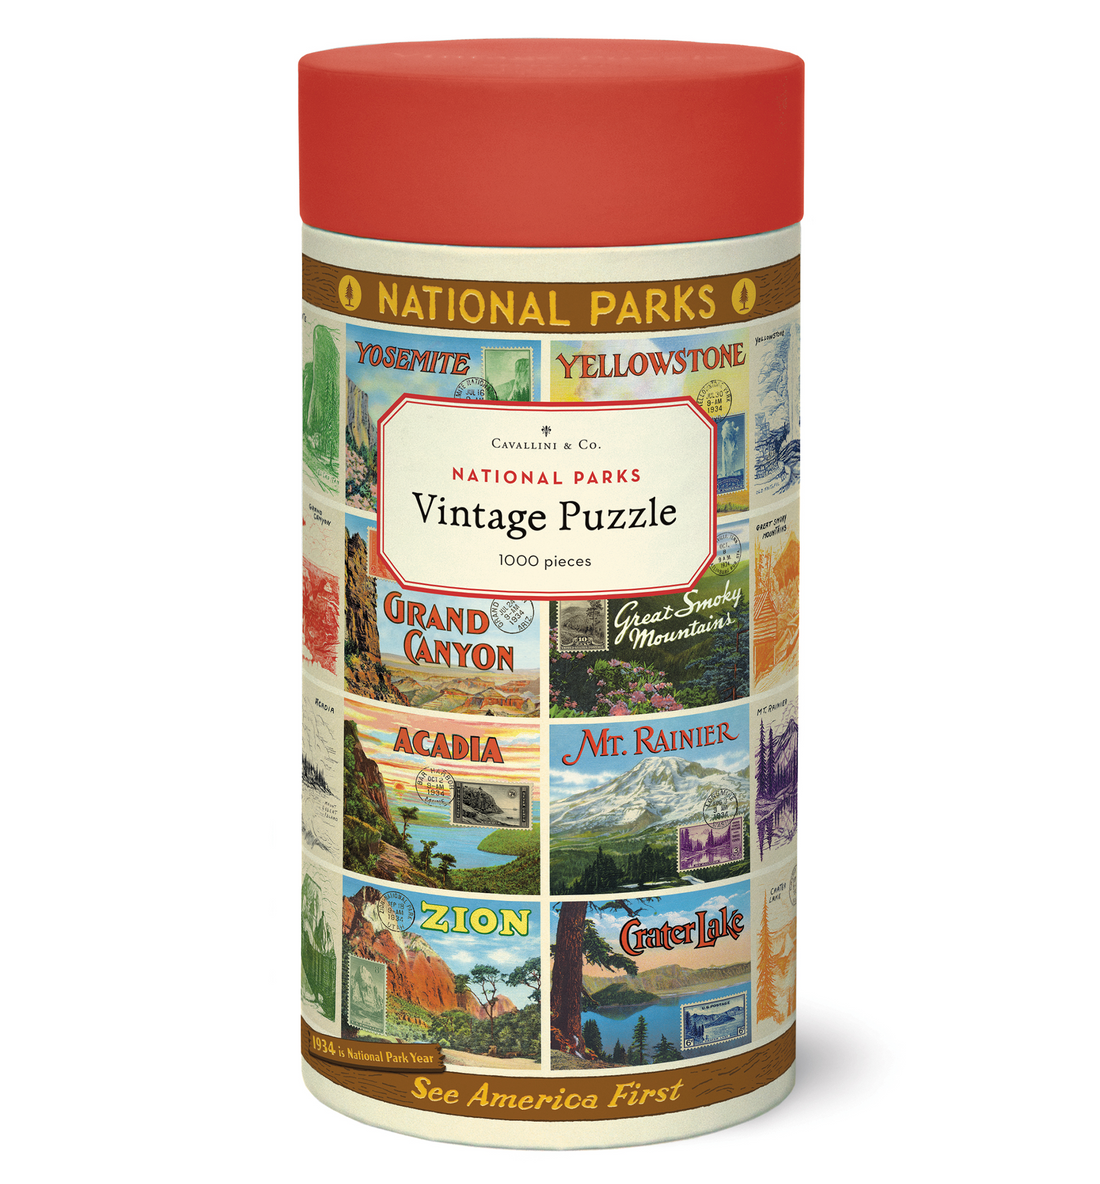 A 1000-piece National Parks 2 Puzzle featuring vintage imagery of U.S. national parks, packaged in a cylindrical container by Cavallini Papers &amp; Co.